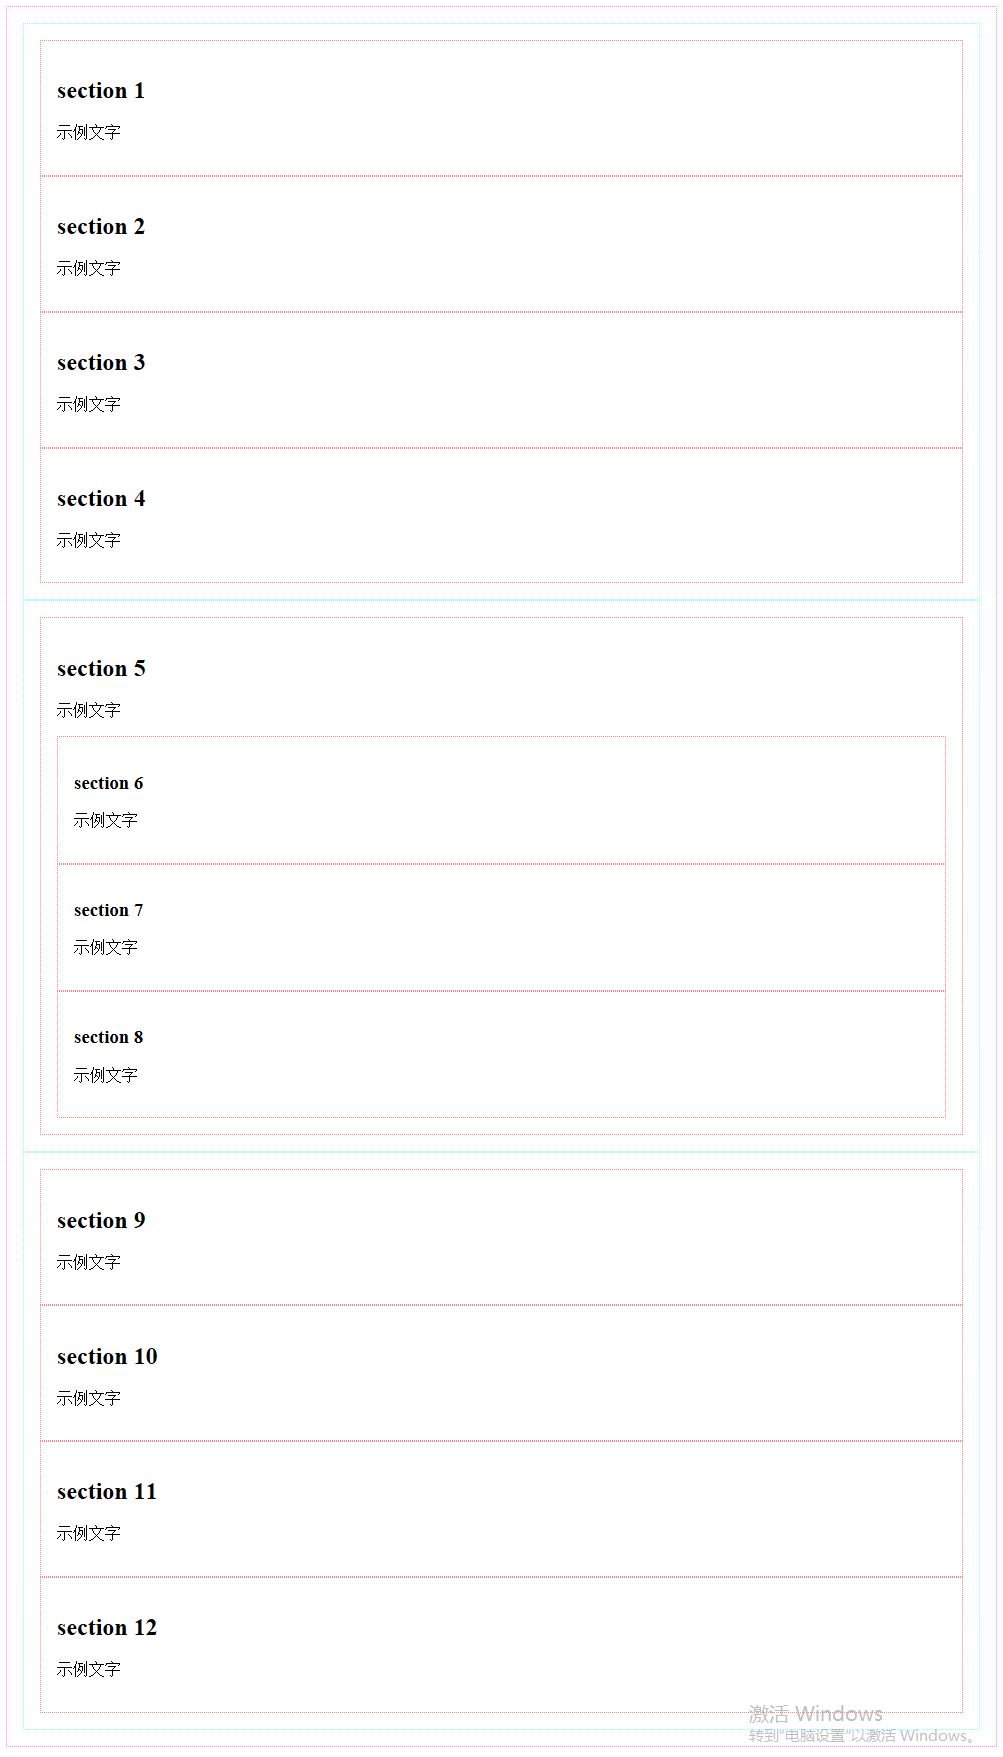 Flexible box layout in css3